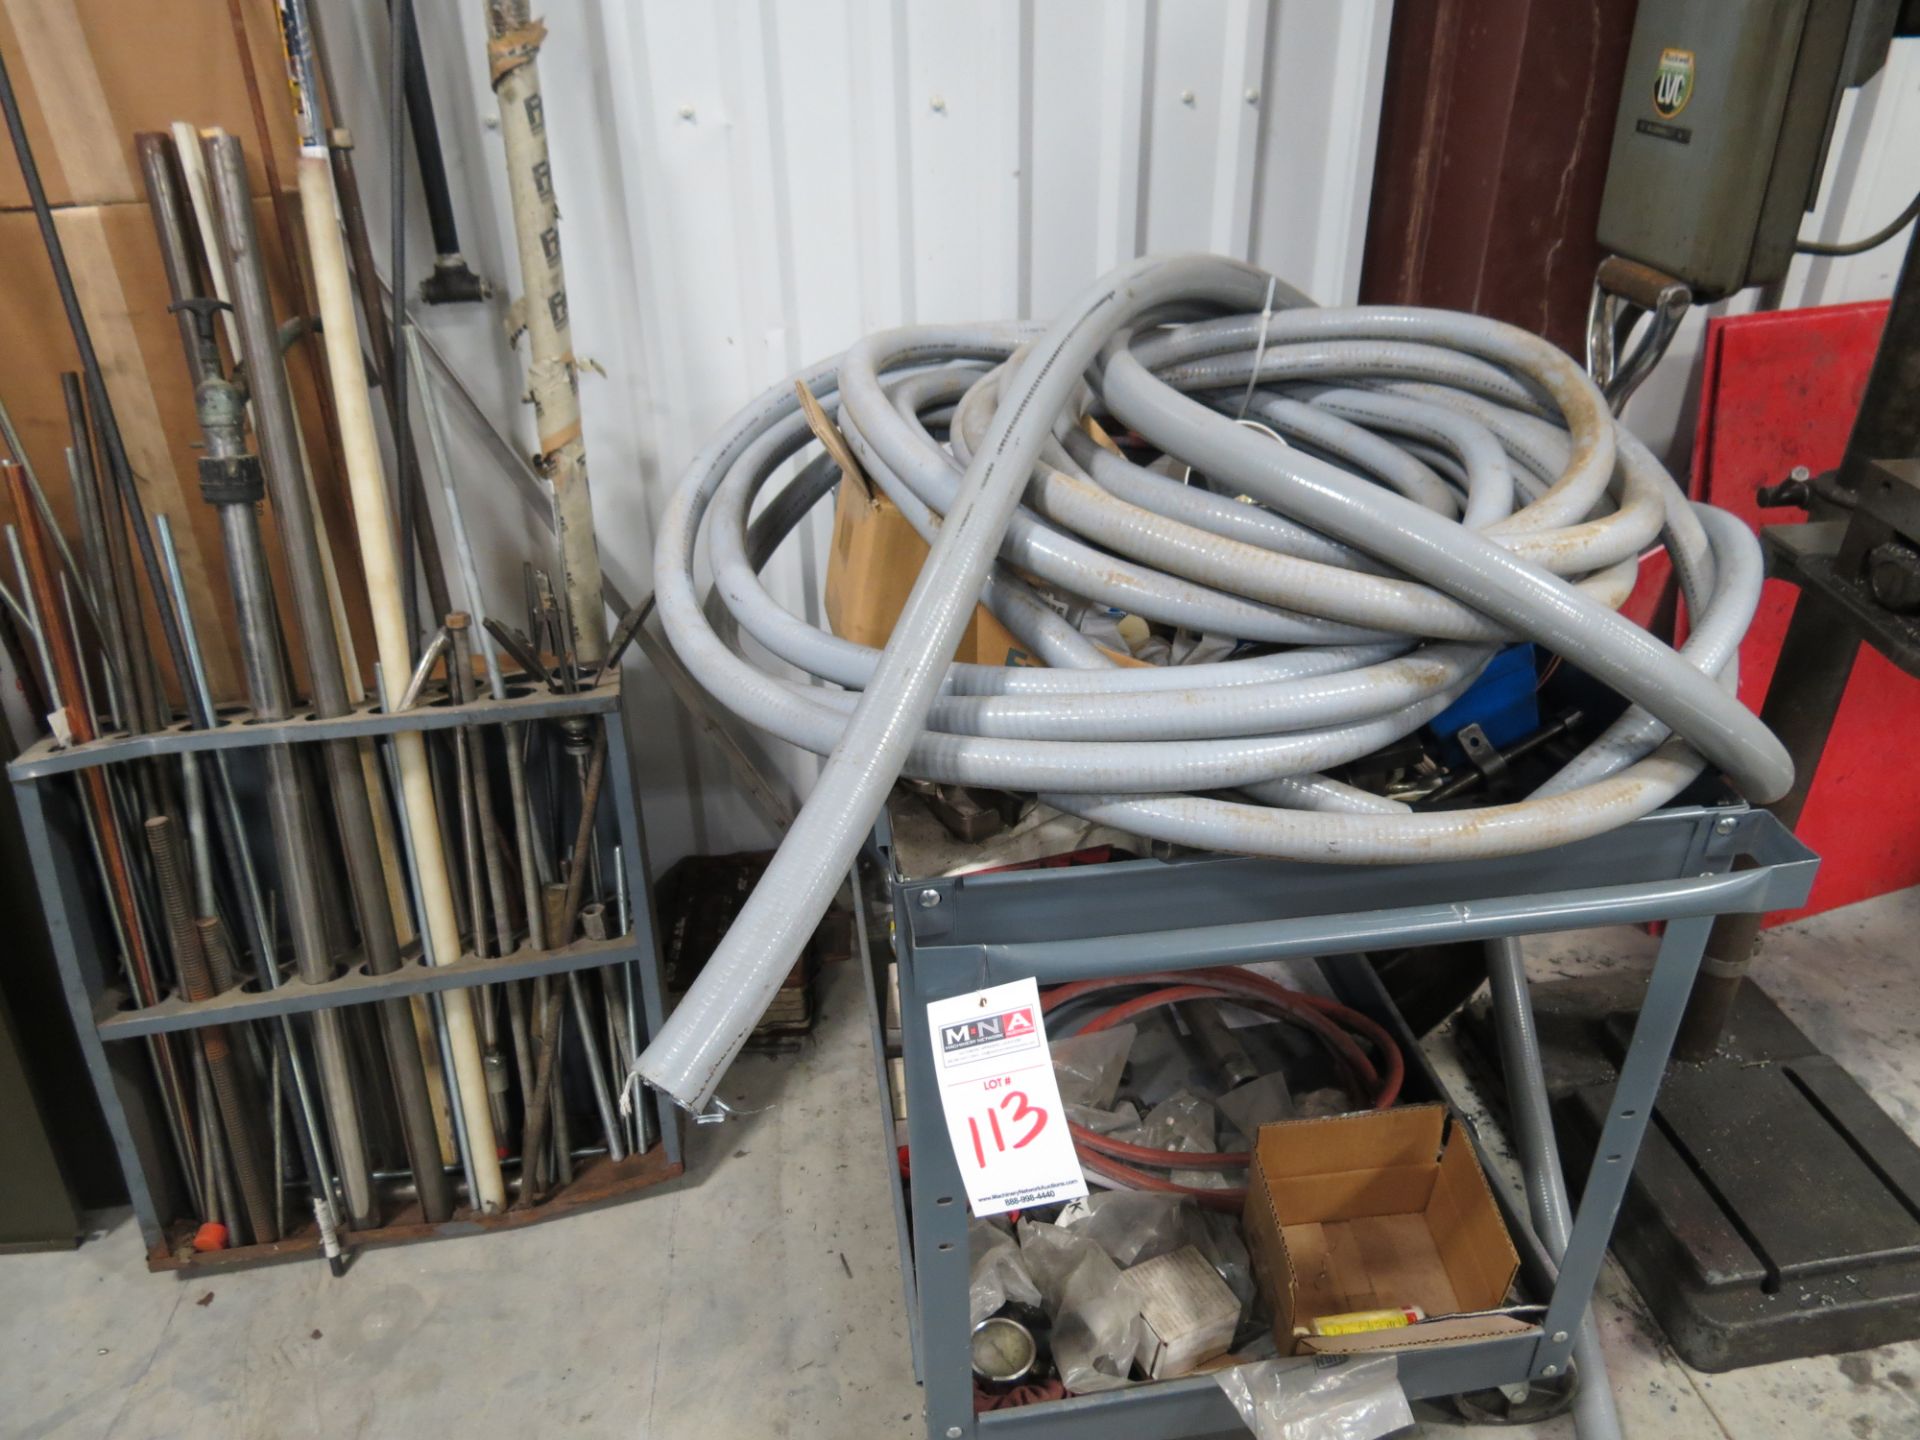 6 sections of shelving with misc maintenance items, wire, v-belts, etc.